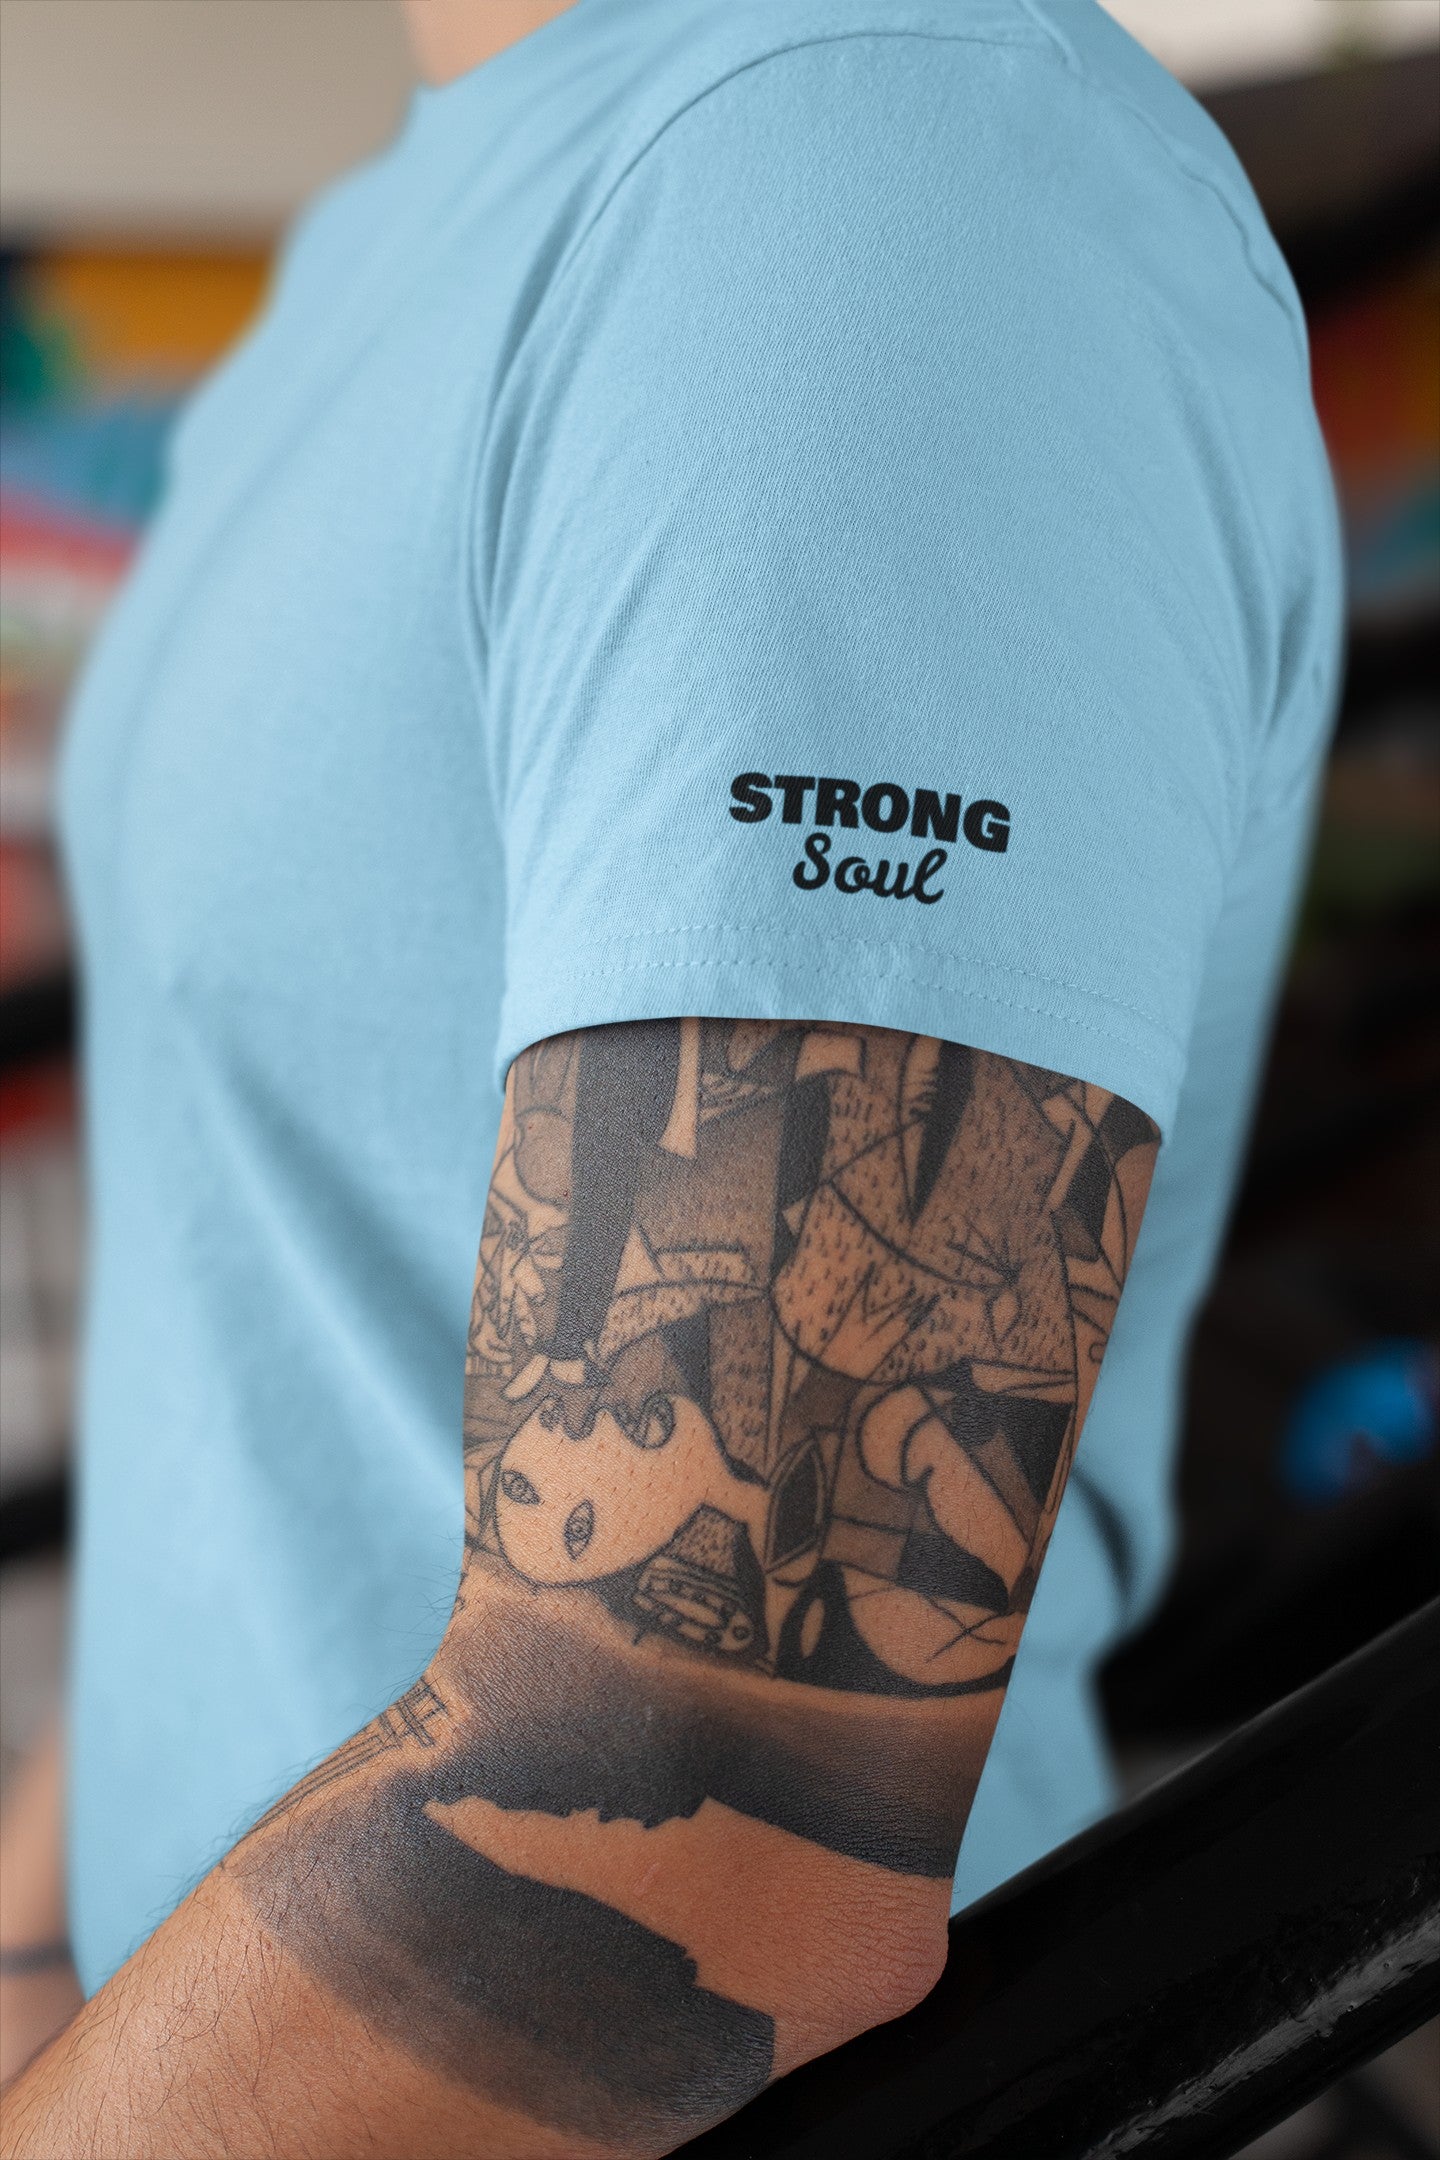 Gym T Shirt - Stay Focus with premium cotton Lycra. The Sports T Shirt by Strong Soul